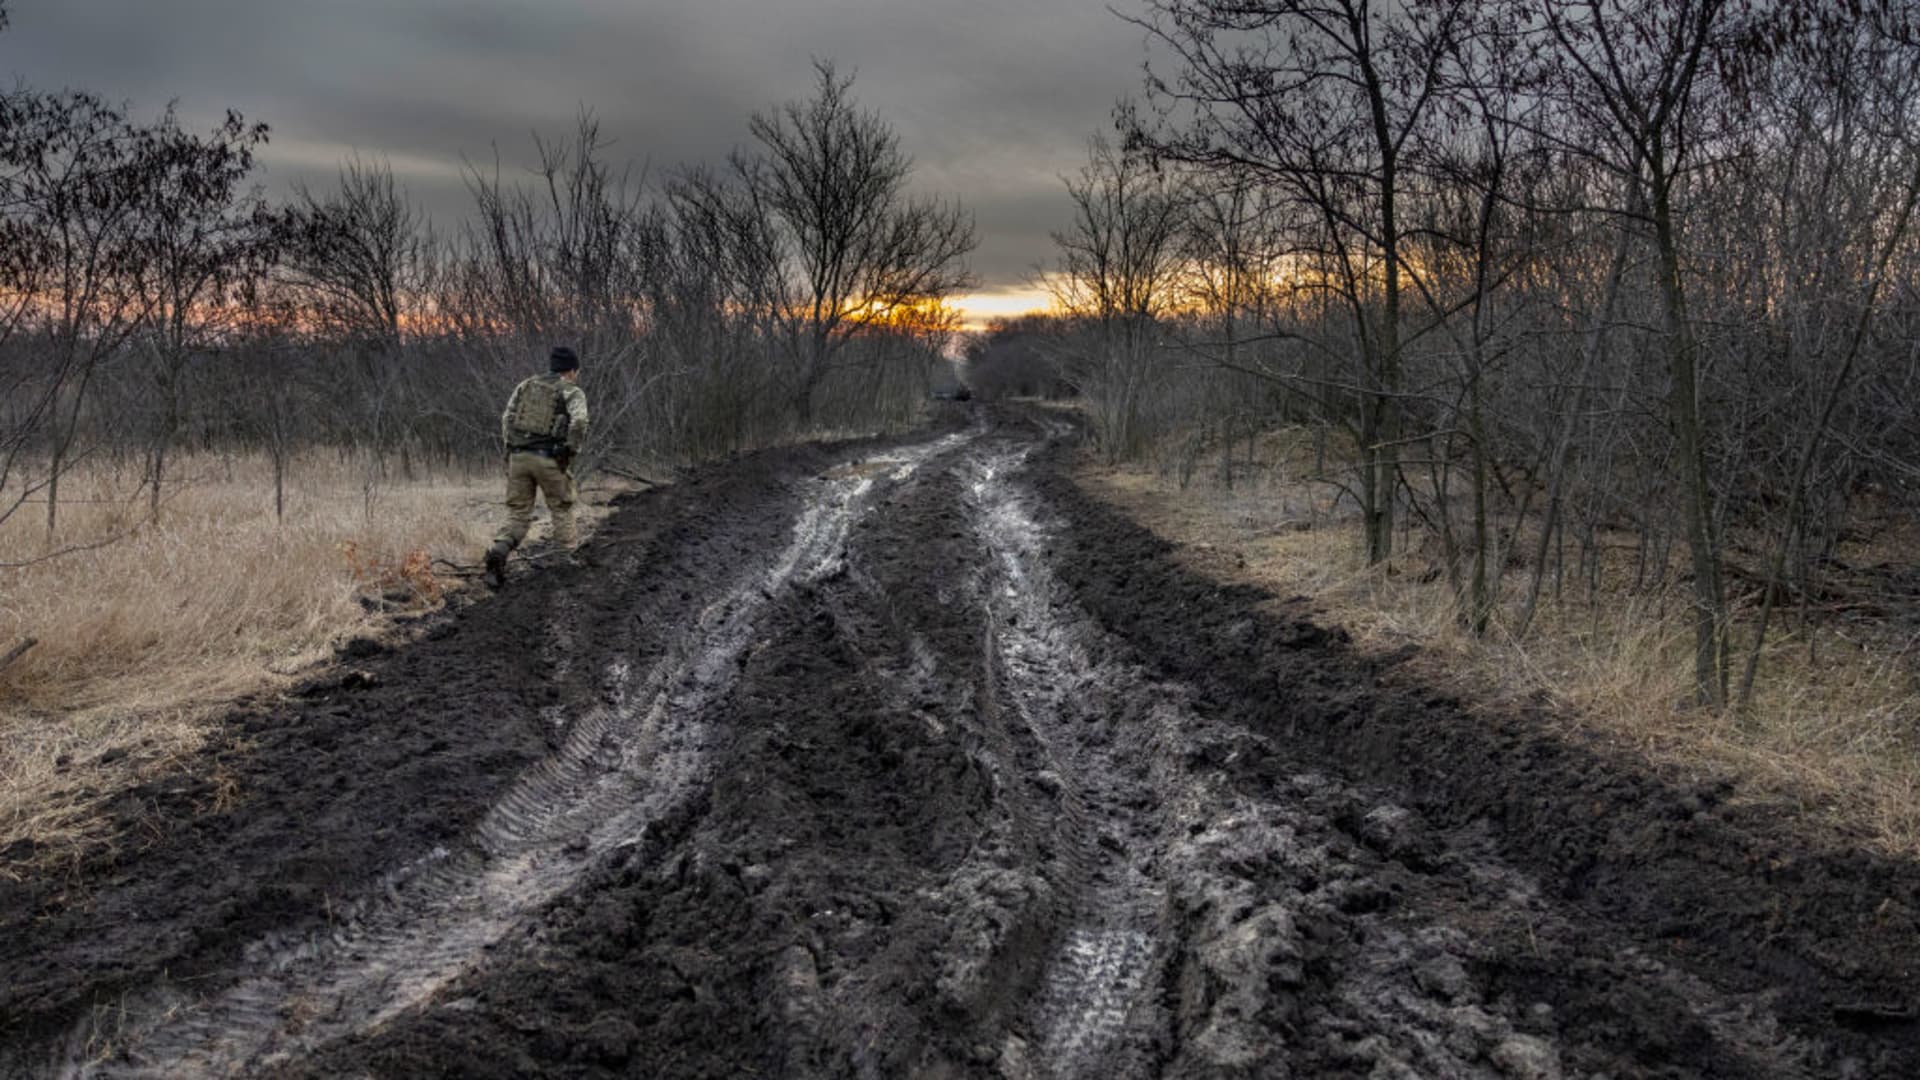 A soldier from a Ukrainian assault brigade walks on a muddy road used to transport and position British-made L118 105 mm Howitzers, on March 4, 2023, near Bakhmut, Ukraine.